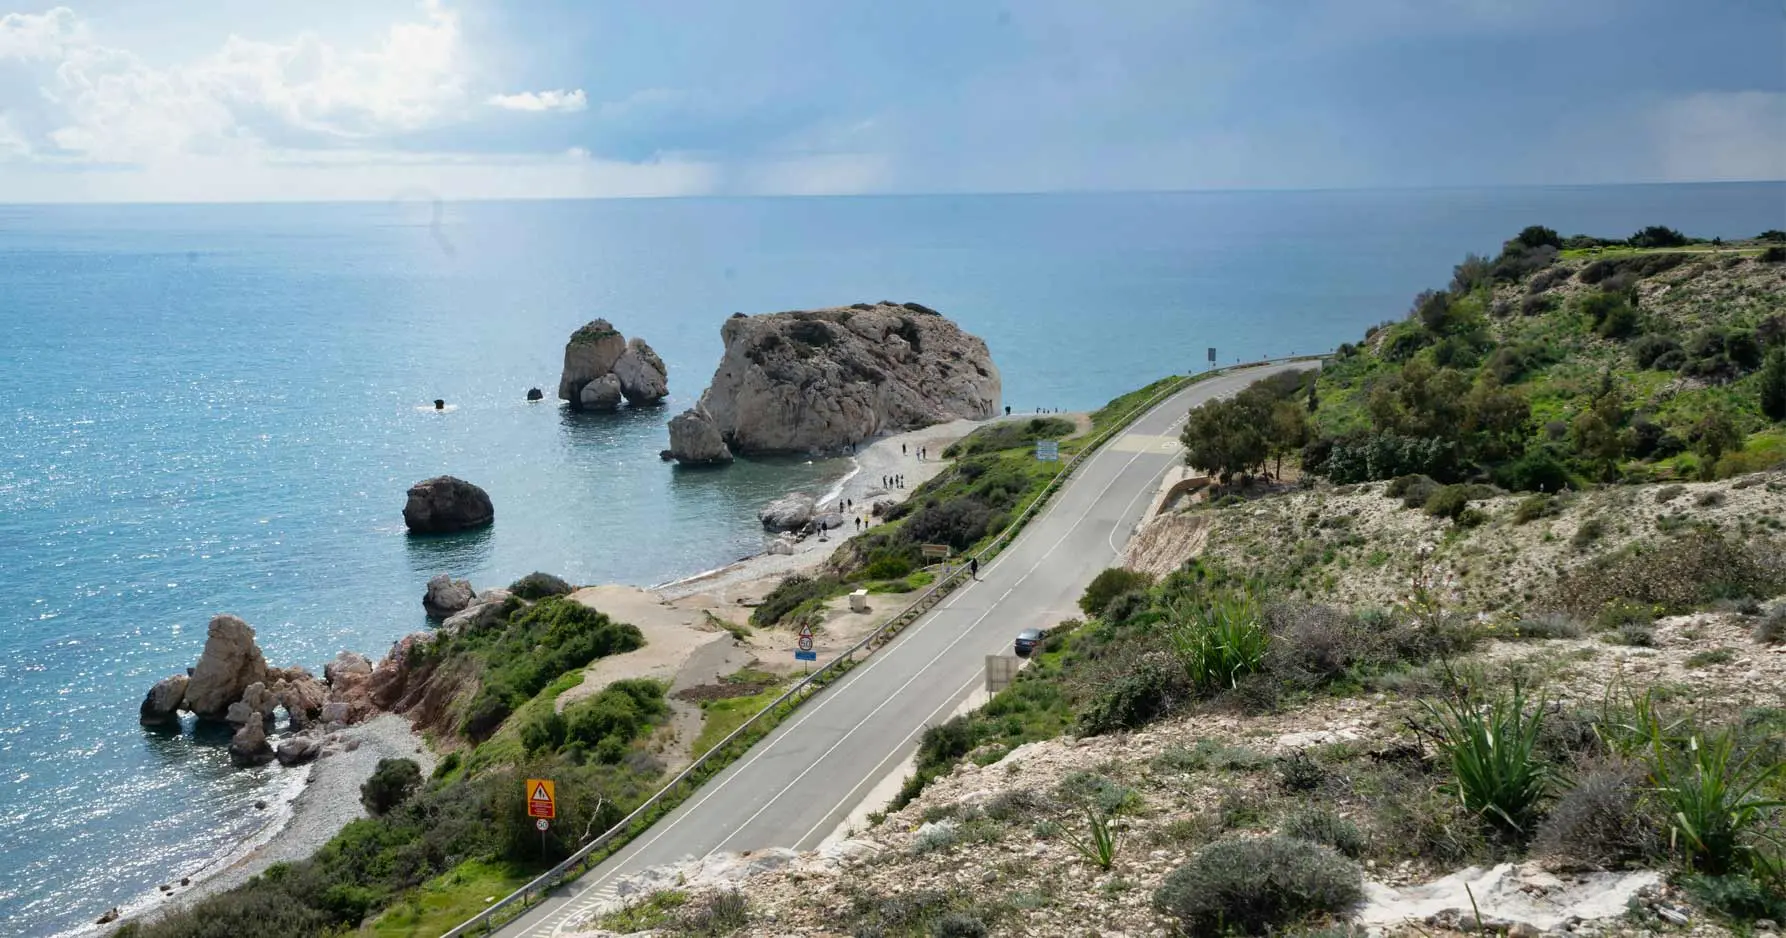 Expansive view of the sea, winding road, and rocks in Cyprus,